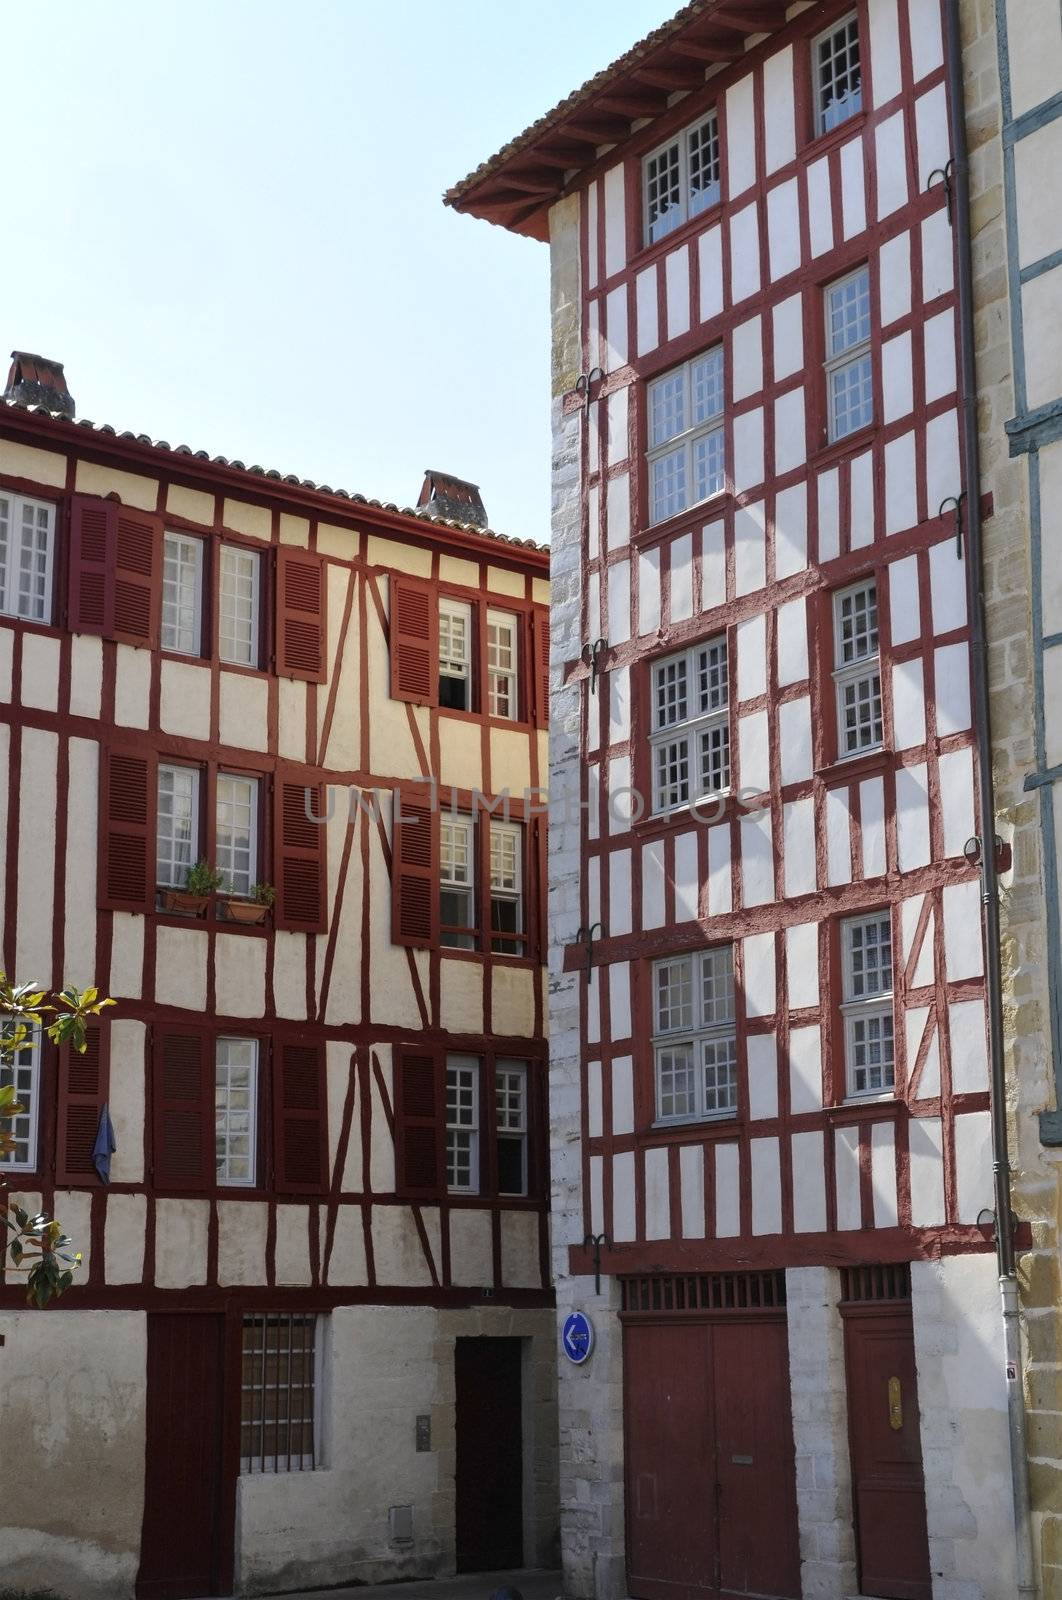 Typical Basque houses in the city of Bayonne by shkyo30